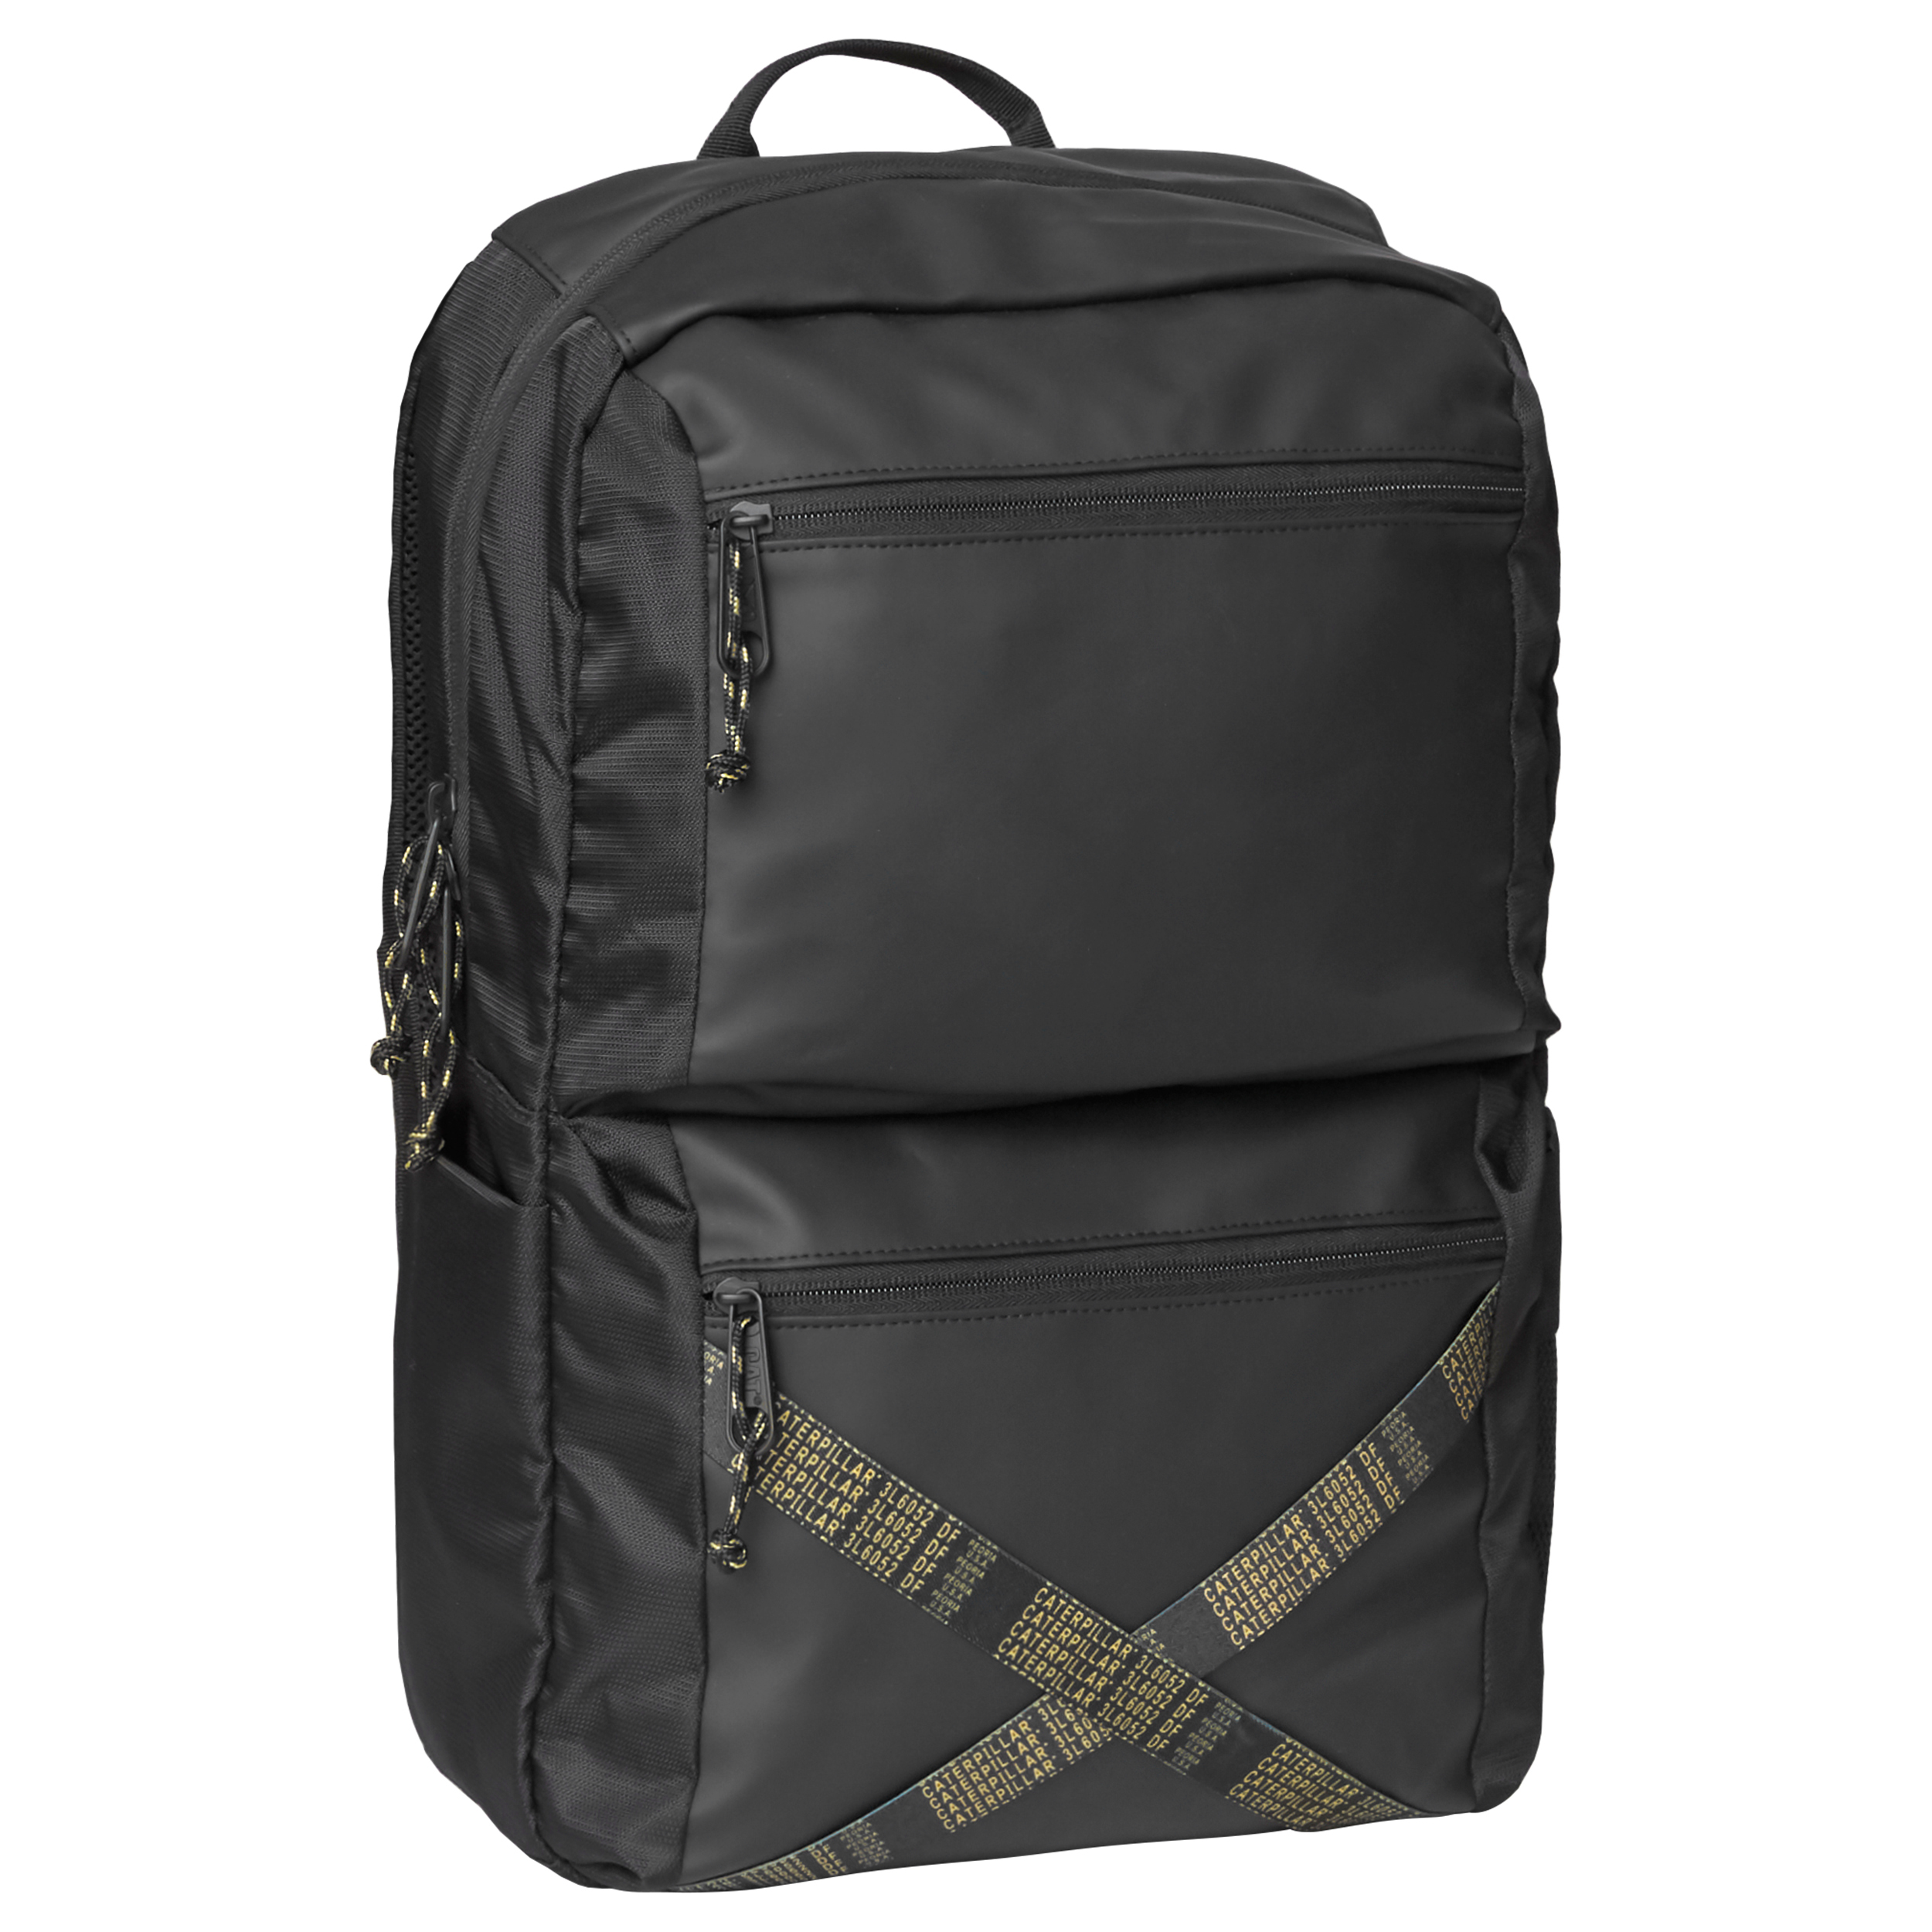 CAT - The Sixty Backpack - Black (84047-01)